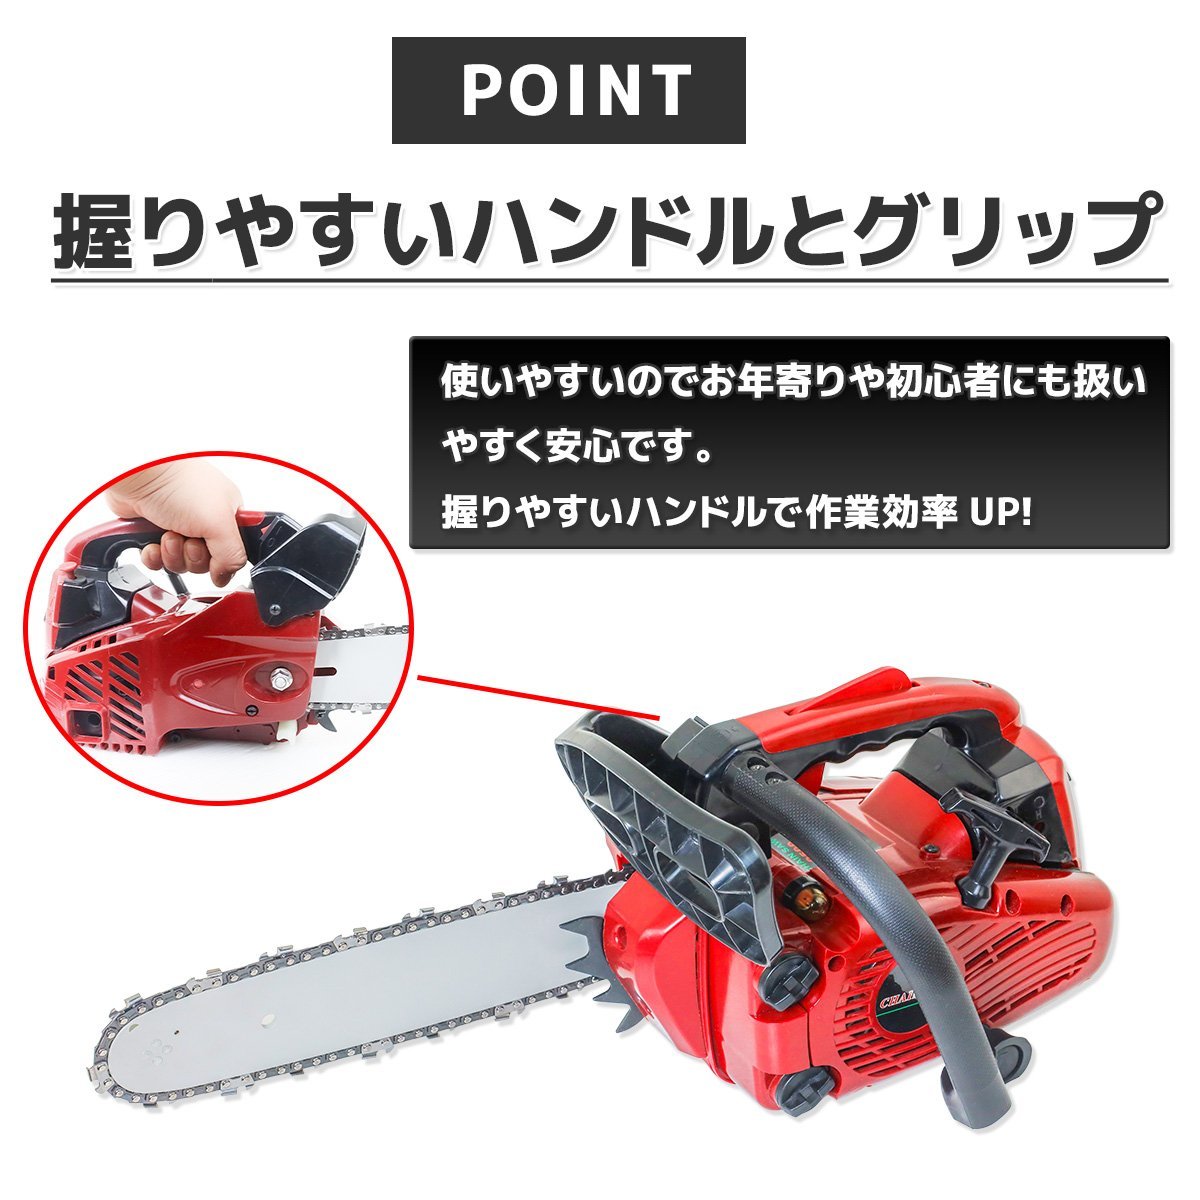 [ new specification ]* 25.4cc light weight chain saw 12 in change n cutting machine small size ..DIY branch cut guide bar compact [ immediate payment ]